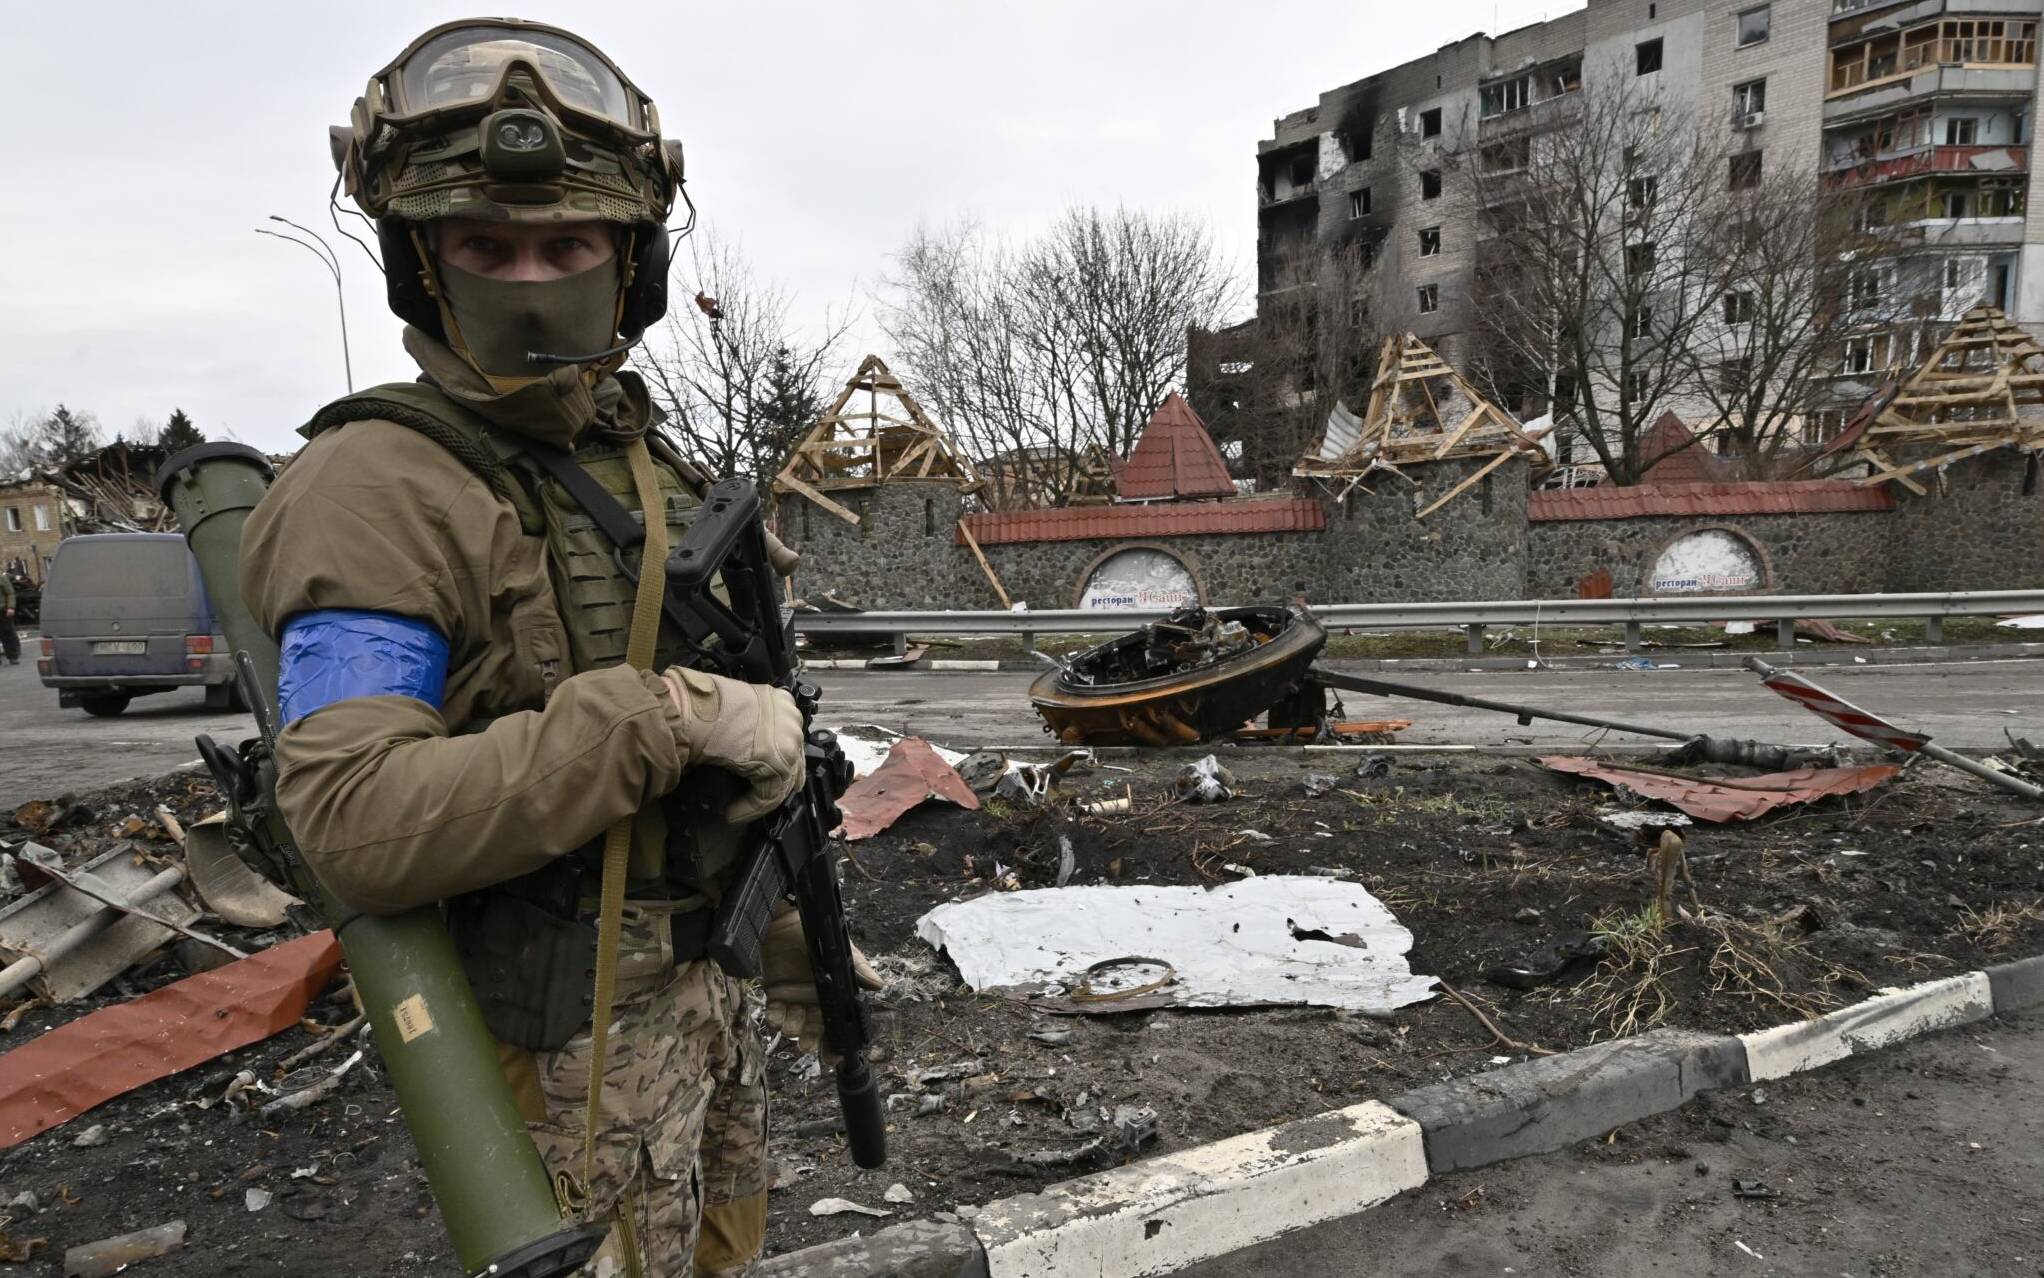 A Ukrainian serviceman stands guard on a street beside a damaged building in the town of Borodianka, northwest of Kyiv, on April 6, 2022, during Russia's military invasion launched on Ukraine. - The Russian retreat last week has left clues of the battle waged to keep a grip on Borodianka, just 50 kilometres (30 miles) north-west of the Ukrainian capital Kyiv. (Photo by Genya SAVILOV / AFP)